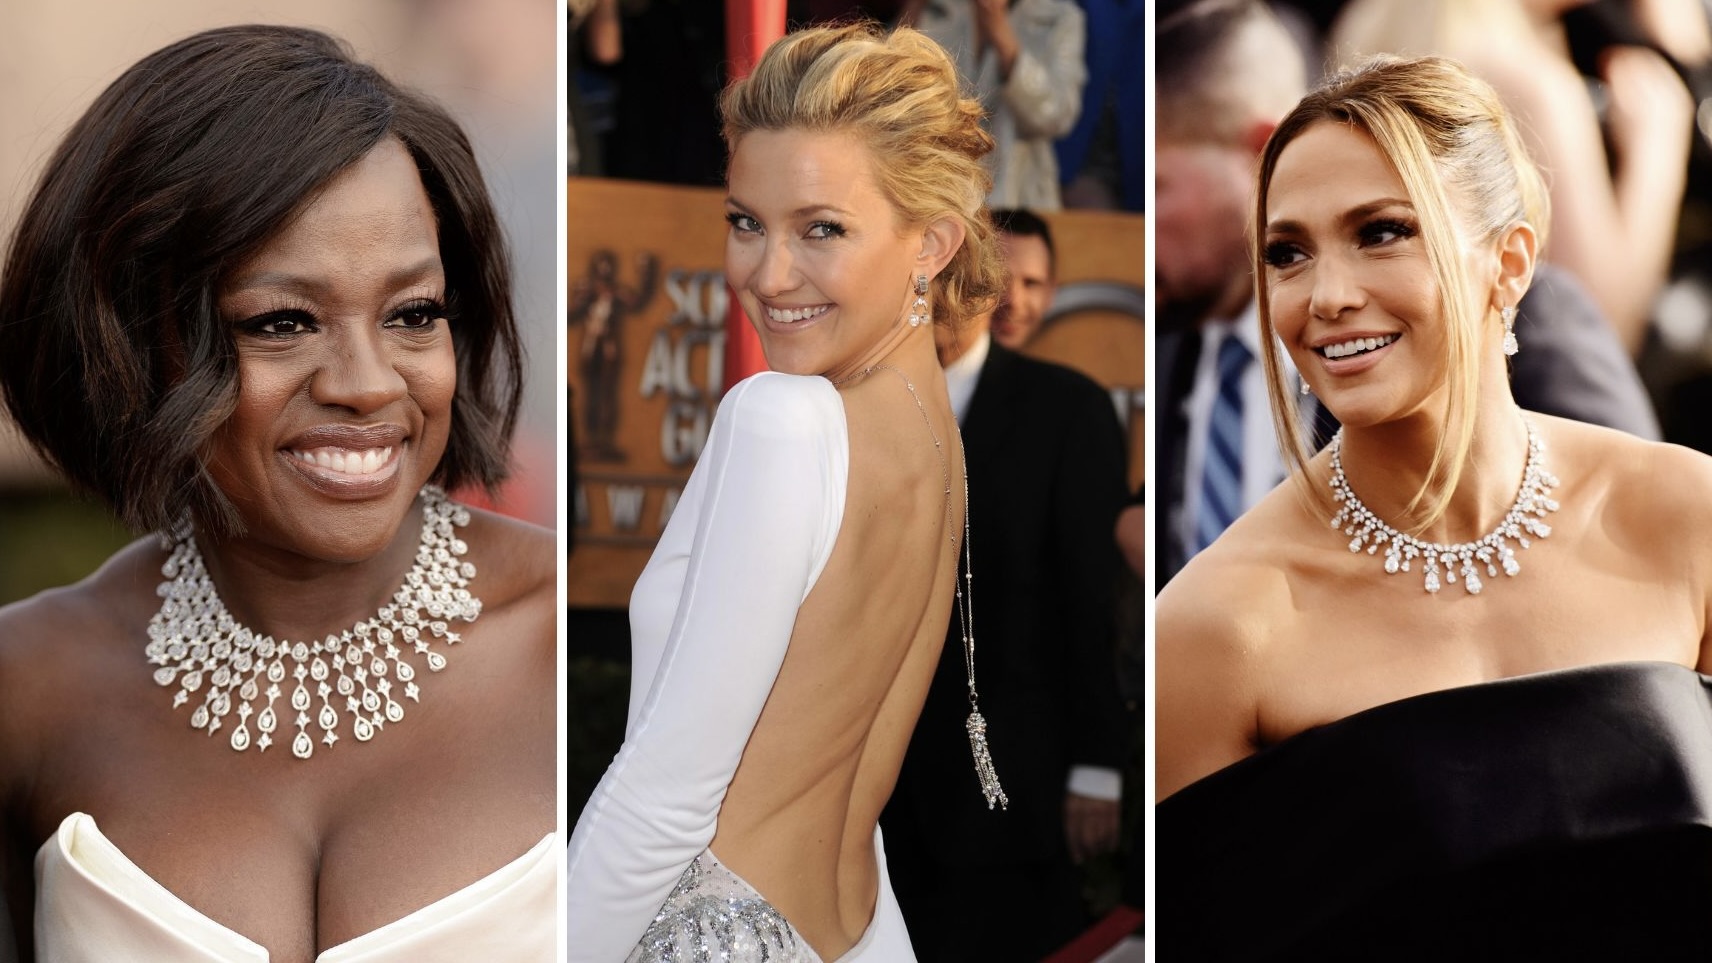 The Best Diamond Jewelry from the SAG Awards History